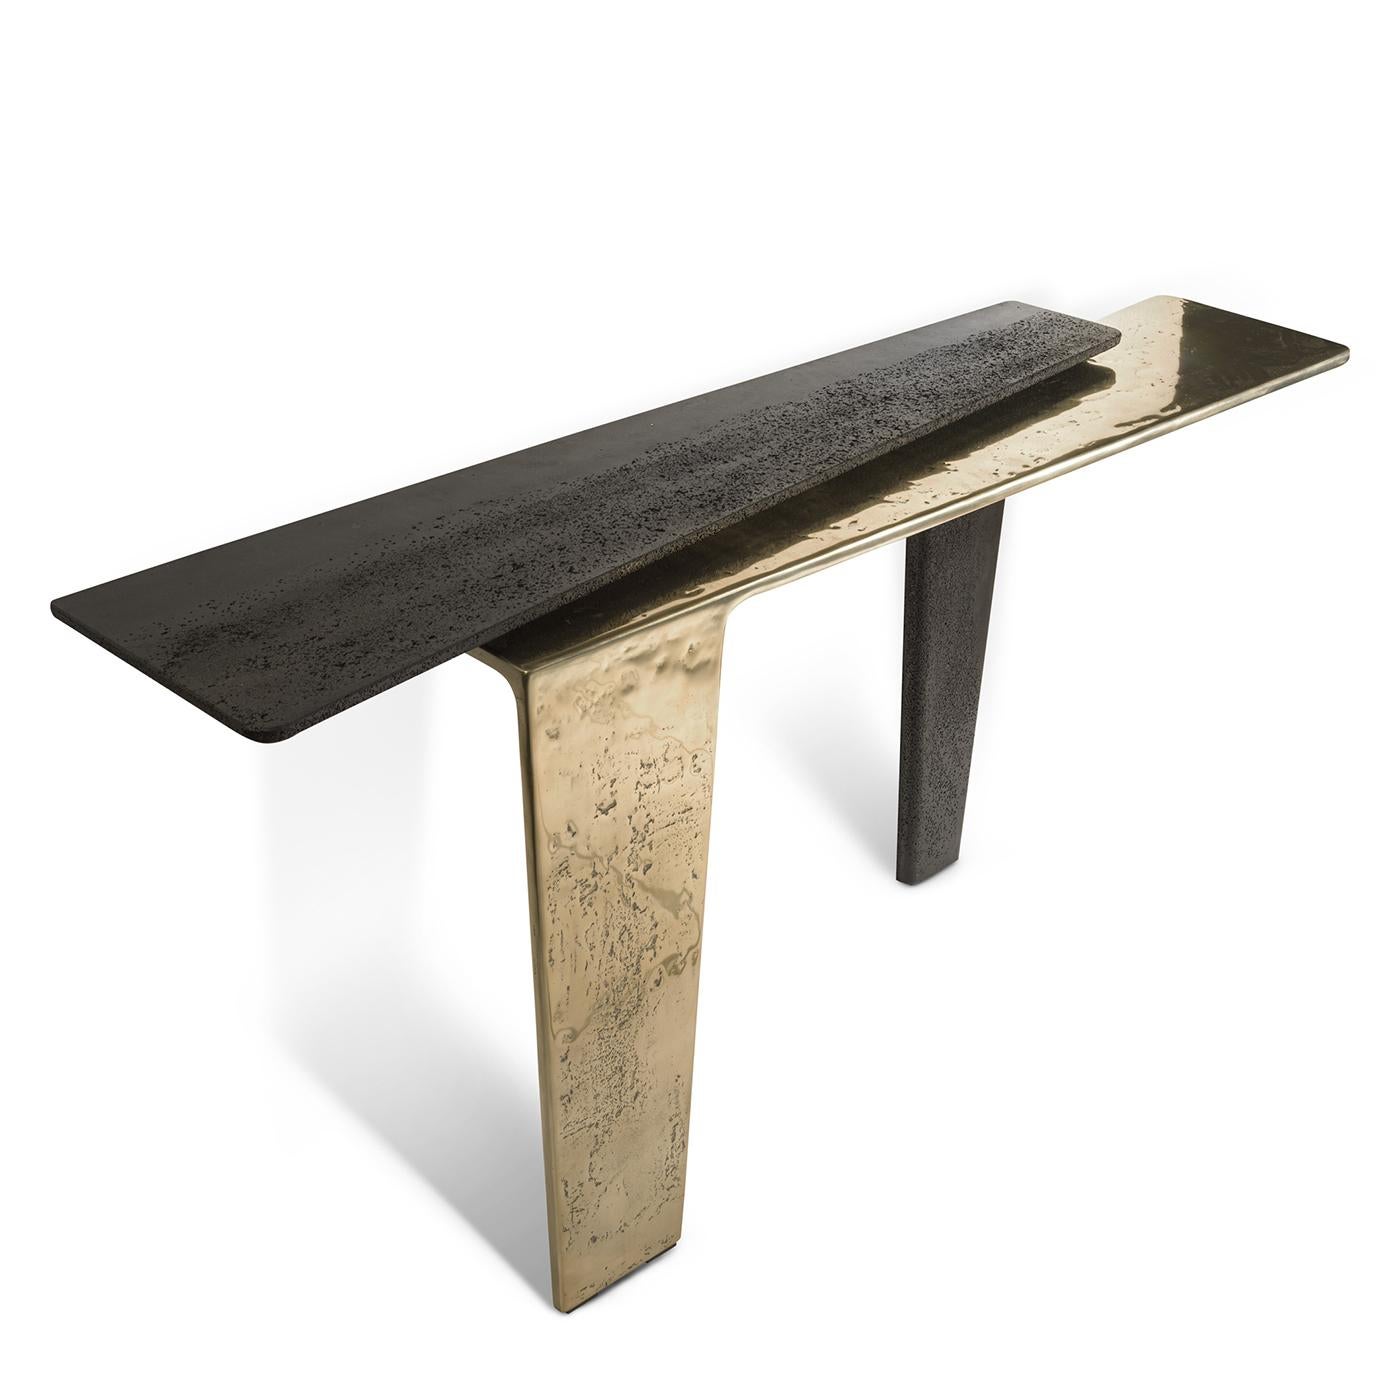 Edena Console Table, one part in solid raw casted 
aluminium polished and lacquered in gold finish and 
the other part in concrete in black matt finish.